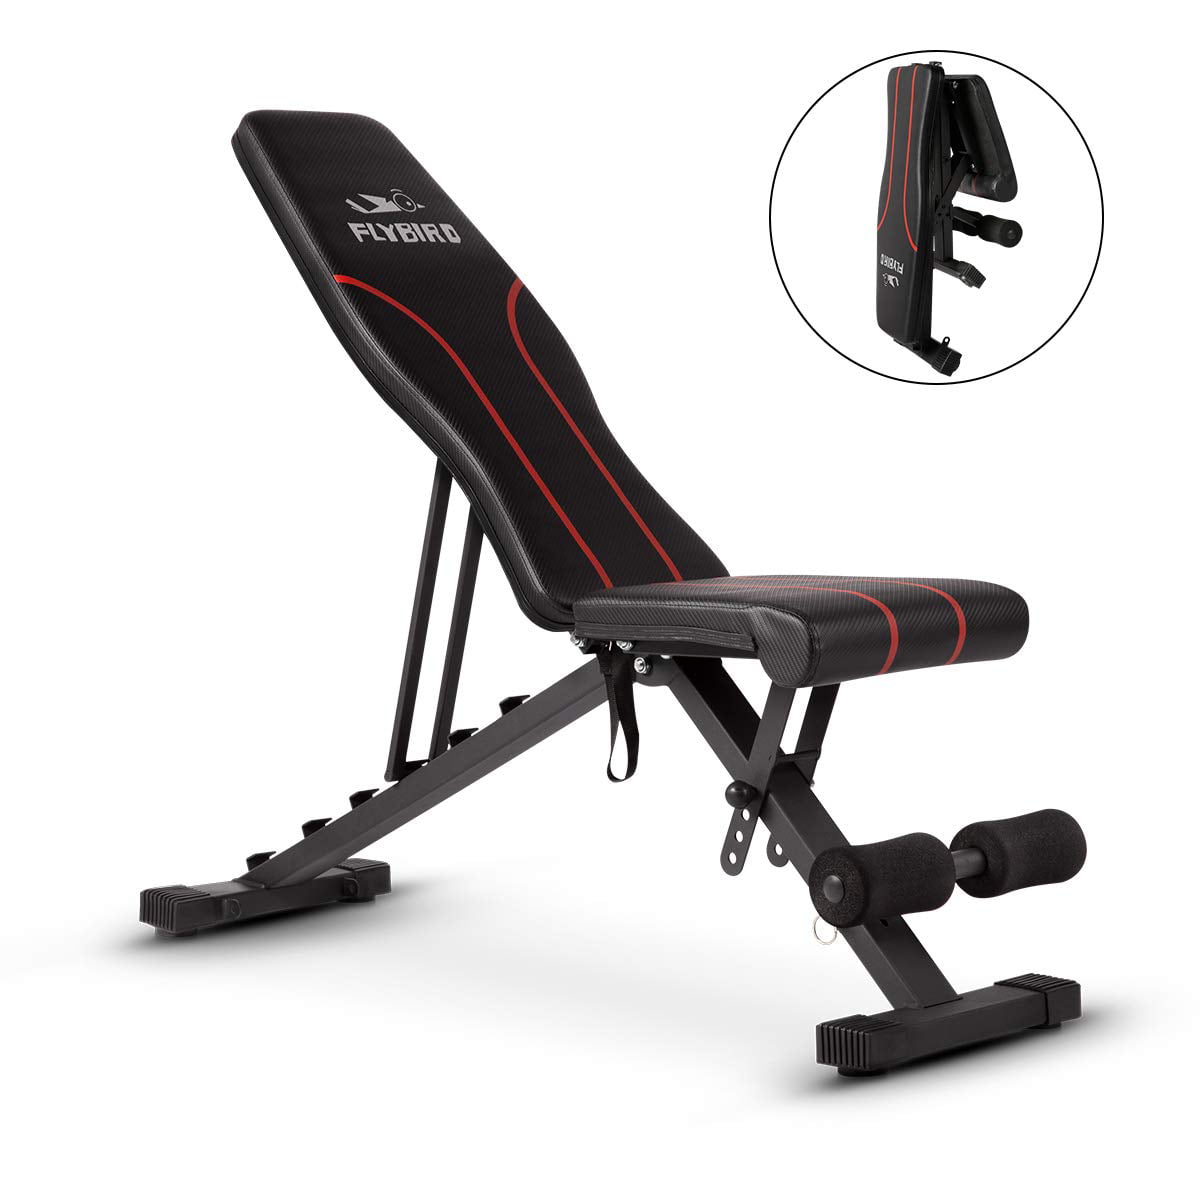 FLYBIRD Adjustable Bench Utility Weight Bench For Full Body Workout Multi Purpose Foldable